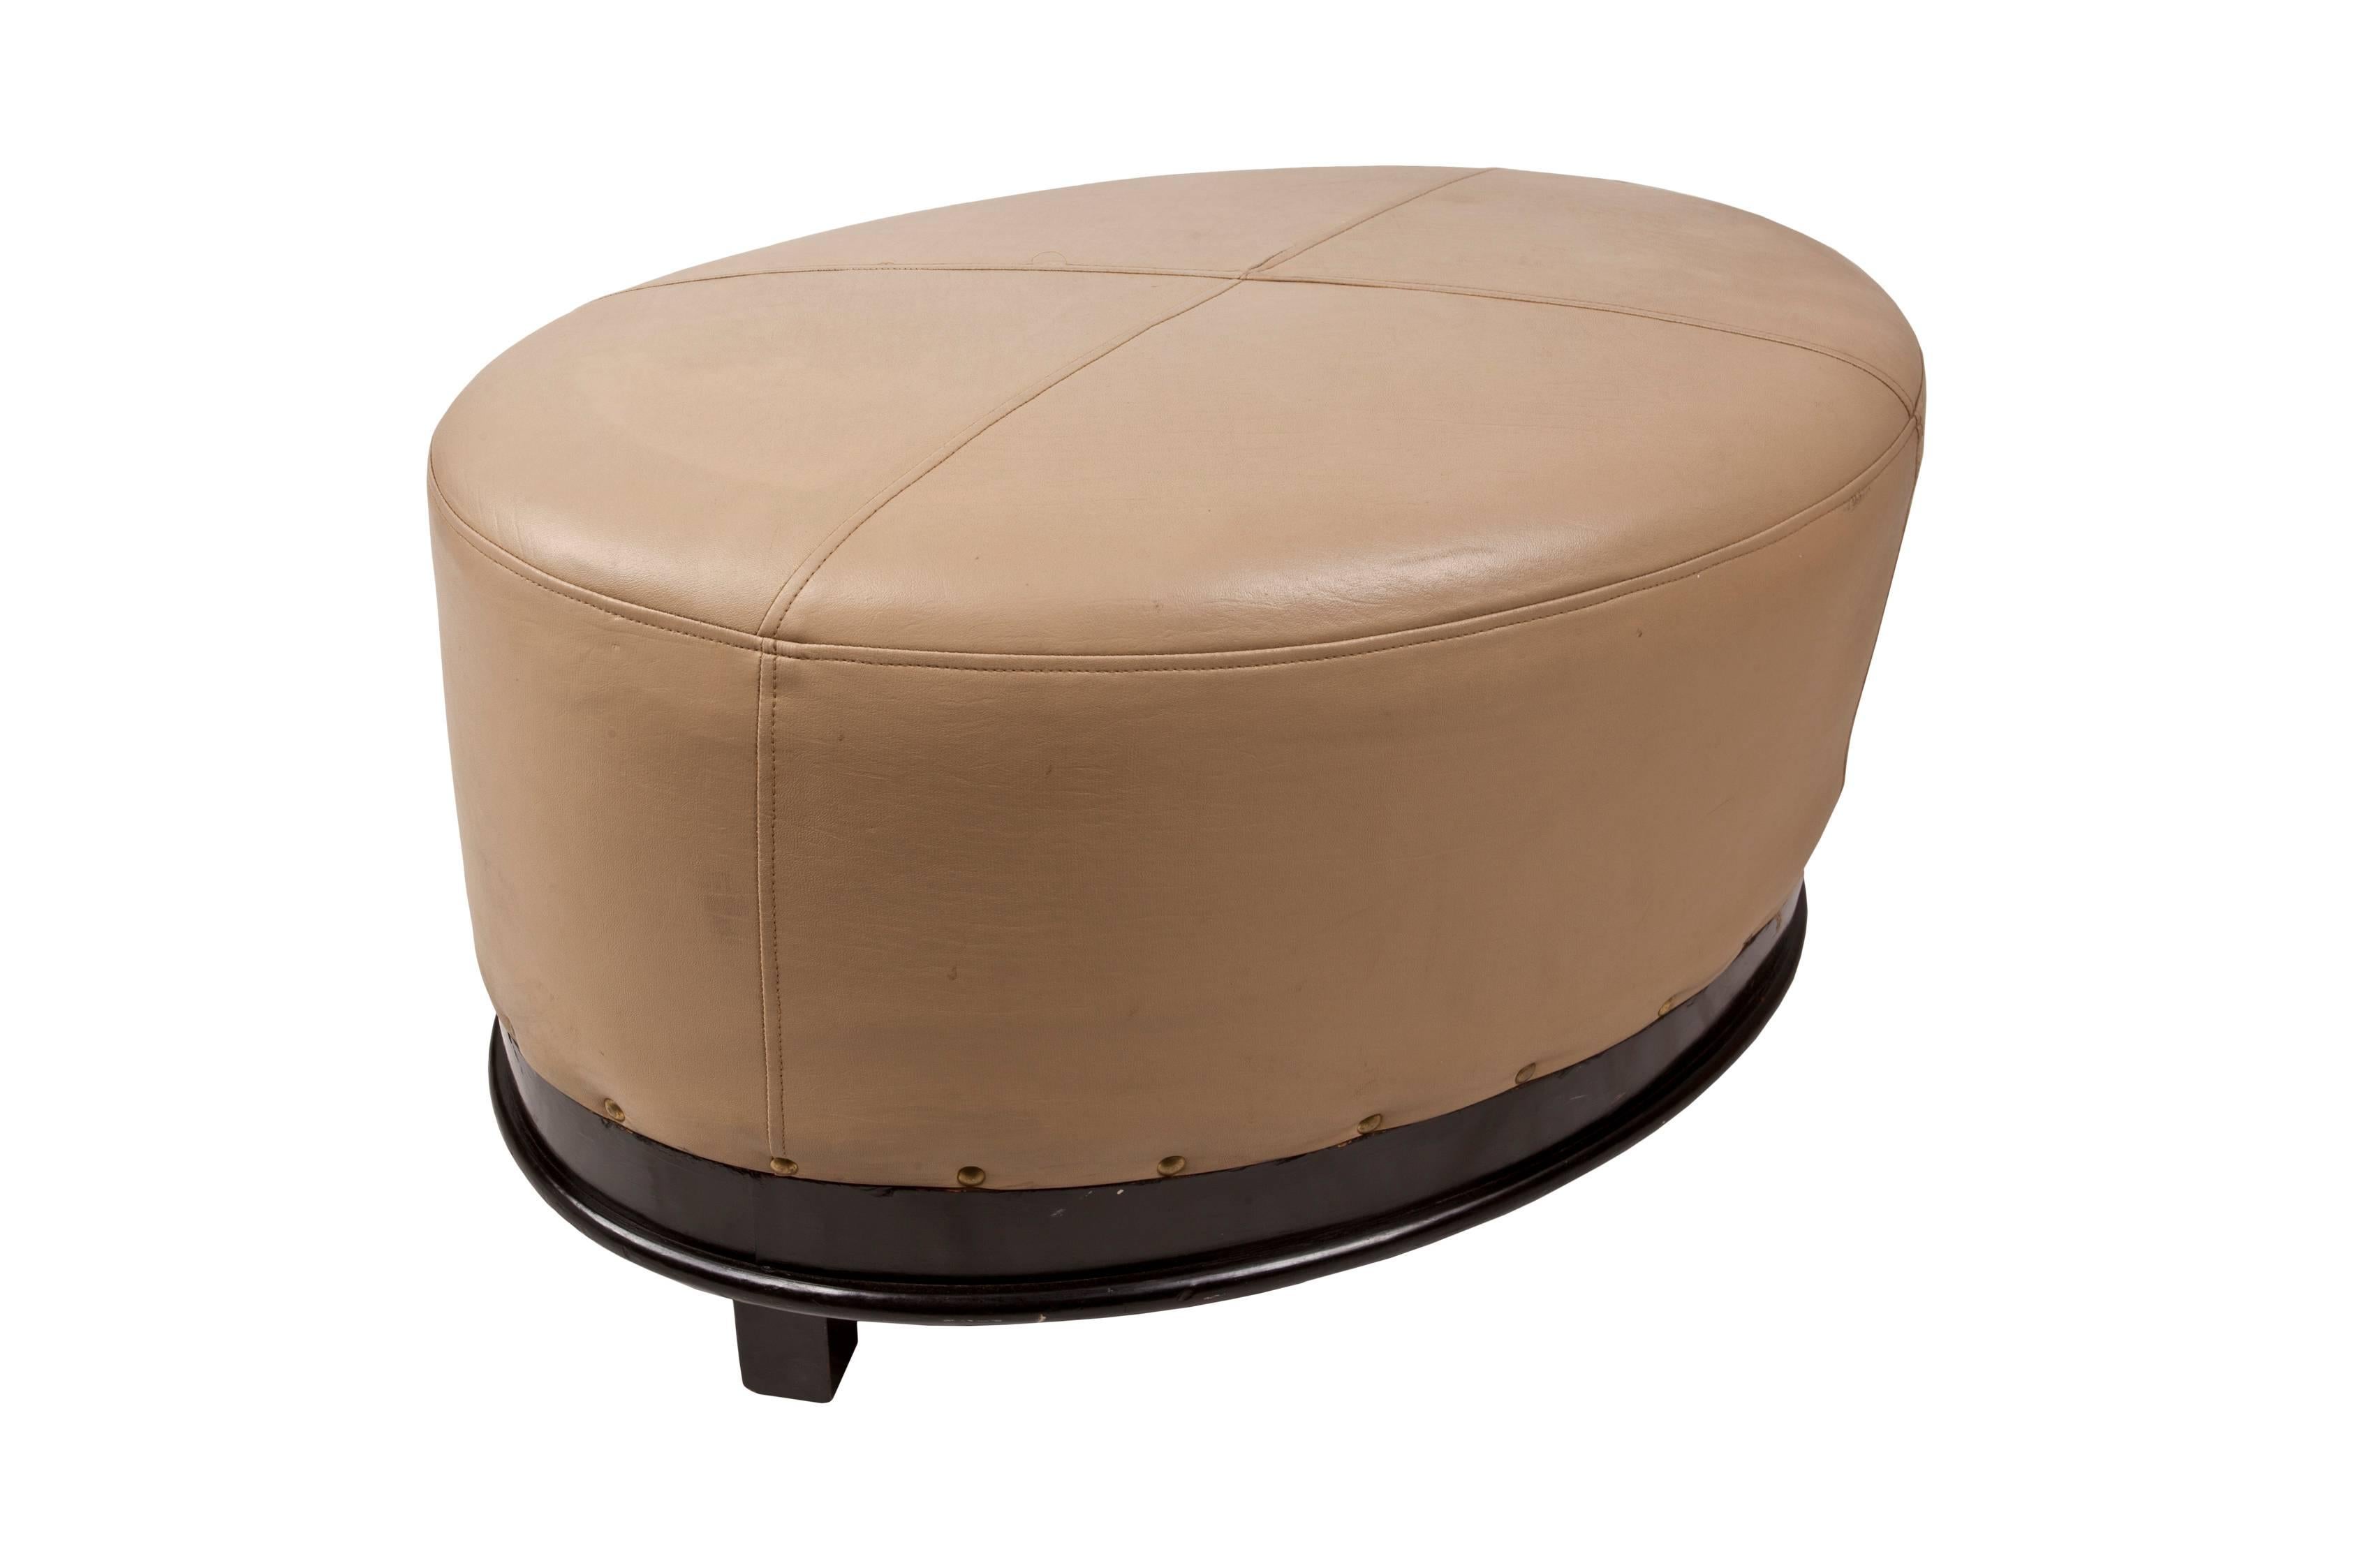 Fabulous pair of tan leather ottomans dating to the 1940s. Nice stitching design on the top, brass rivets along the bottom edge and in excellent condition. True color are the professional photographs, the close-ups are slightly over exposed.

 